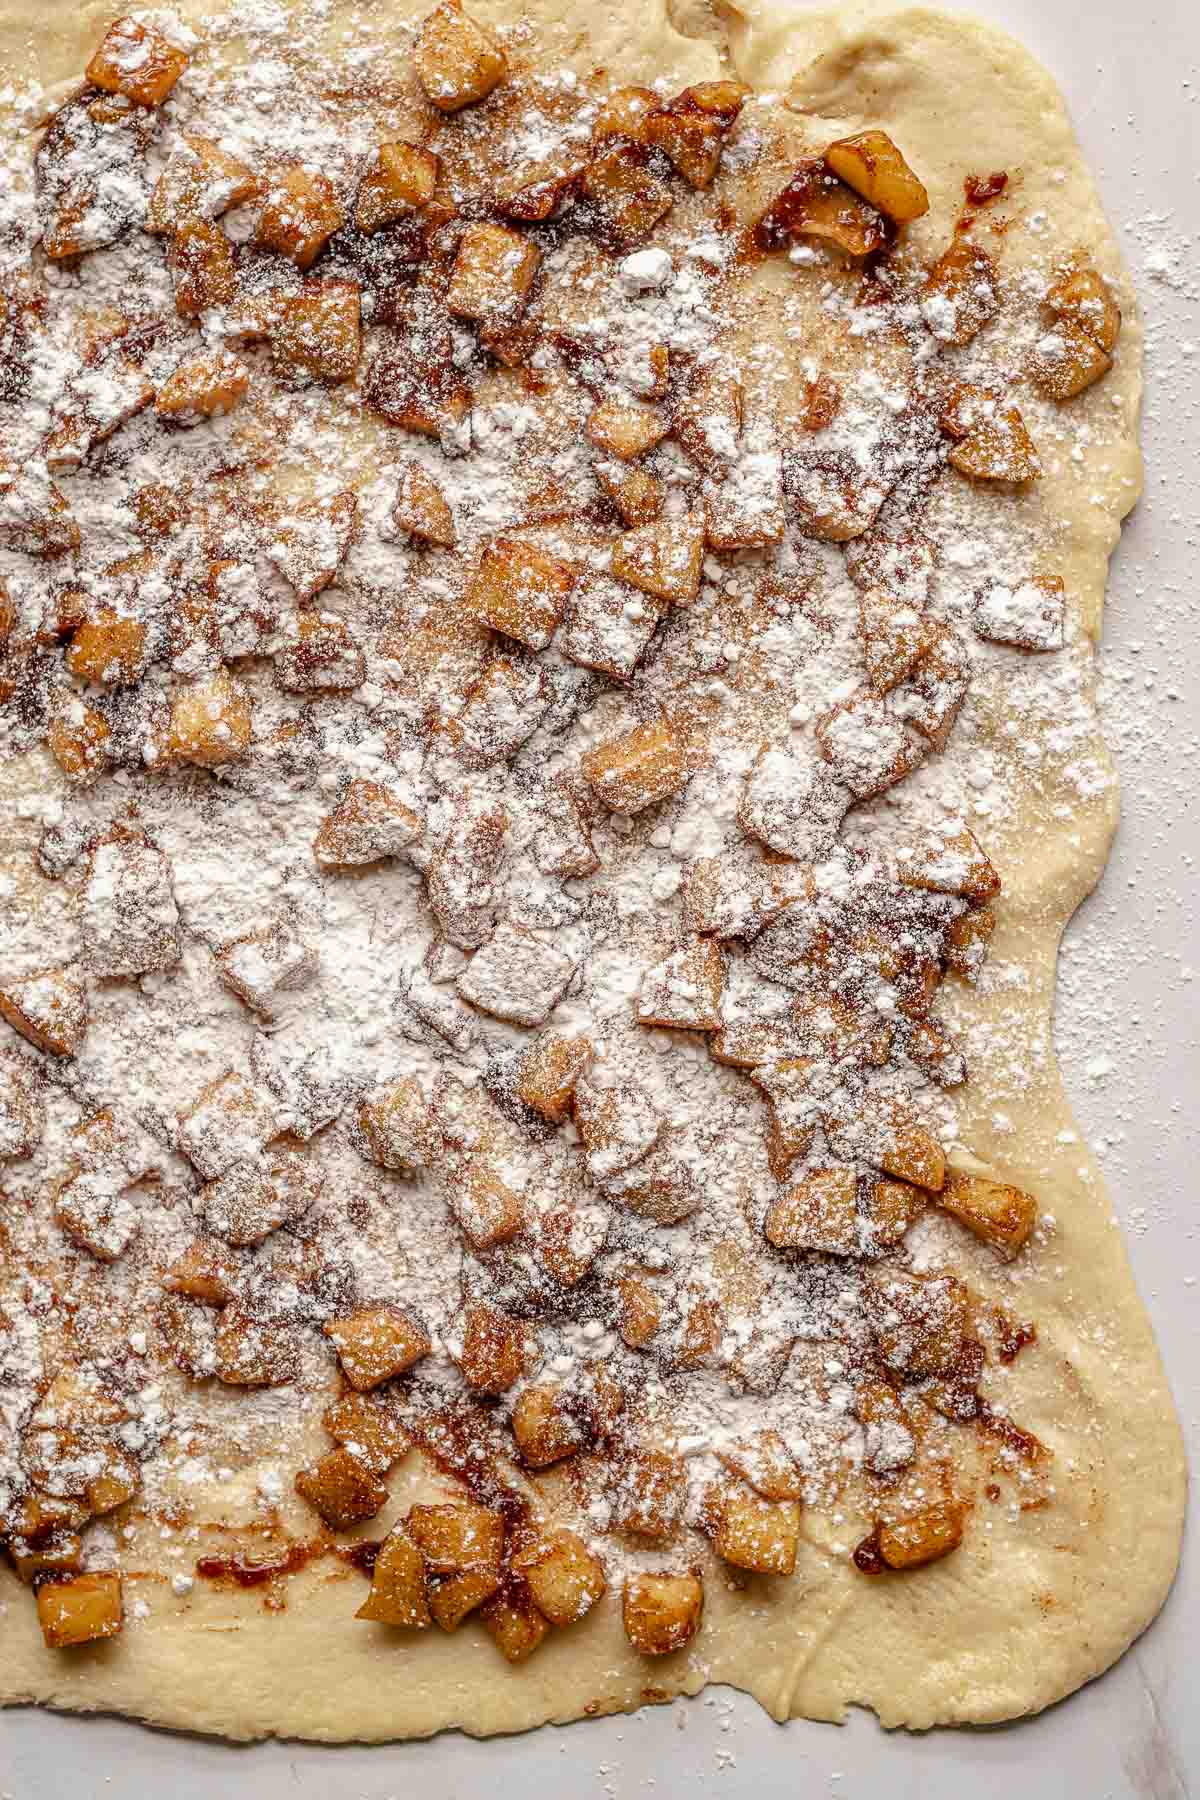 Flour on top of the apples and dough.